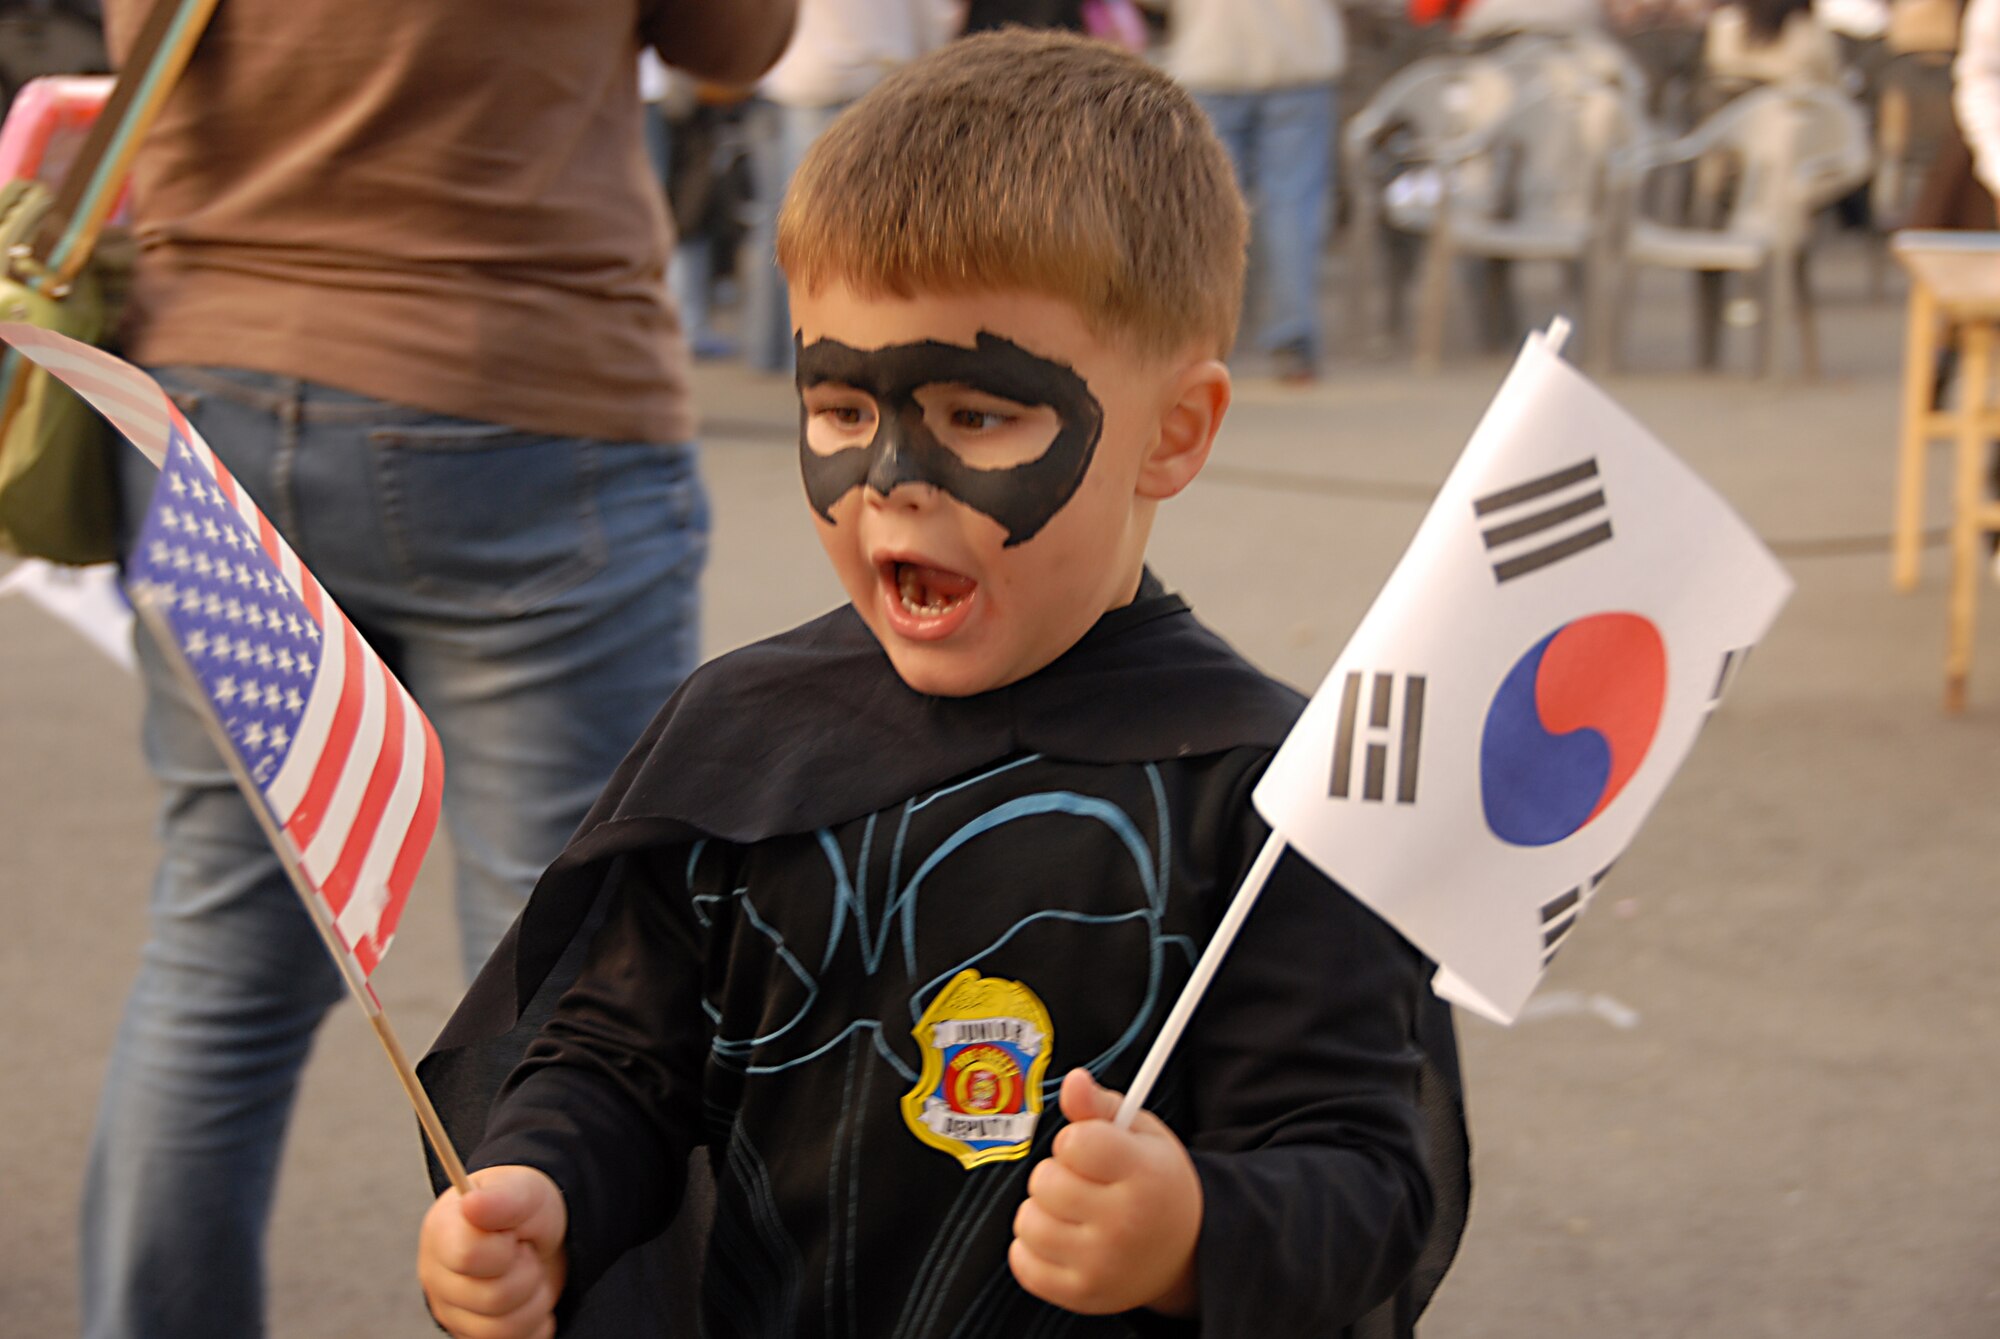 OSAN AIR BASE, Republic of Korea -- Jacob Reese, the 4-year-old son of LtCol Gregory Reese, 51SFS Commander,  excitedly waves both a Korean and American flag during the Korean/American Friendship Festival on Oct. 15, 2007 (U.S. Air Force photo by Staff Sgt. Ronnie Hill) (Released)